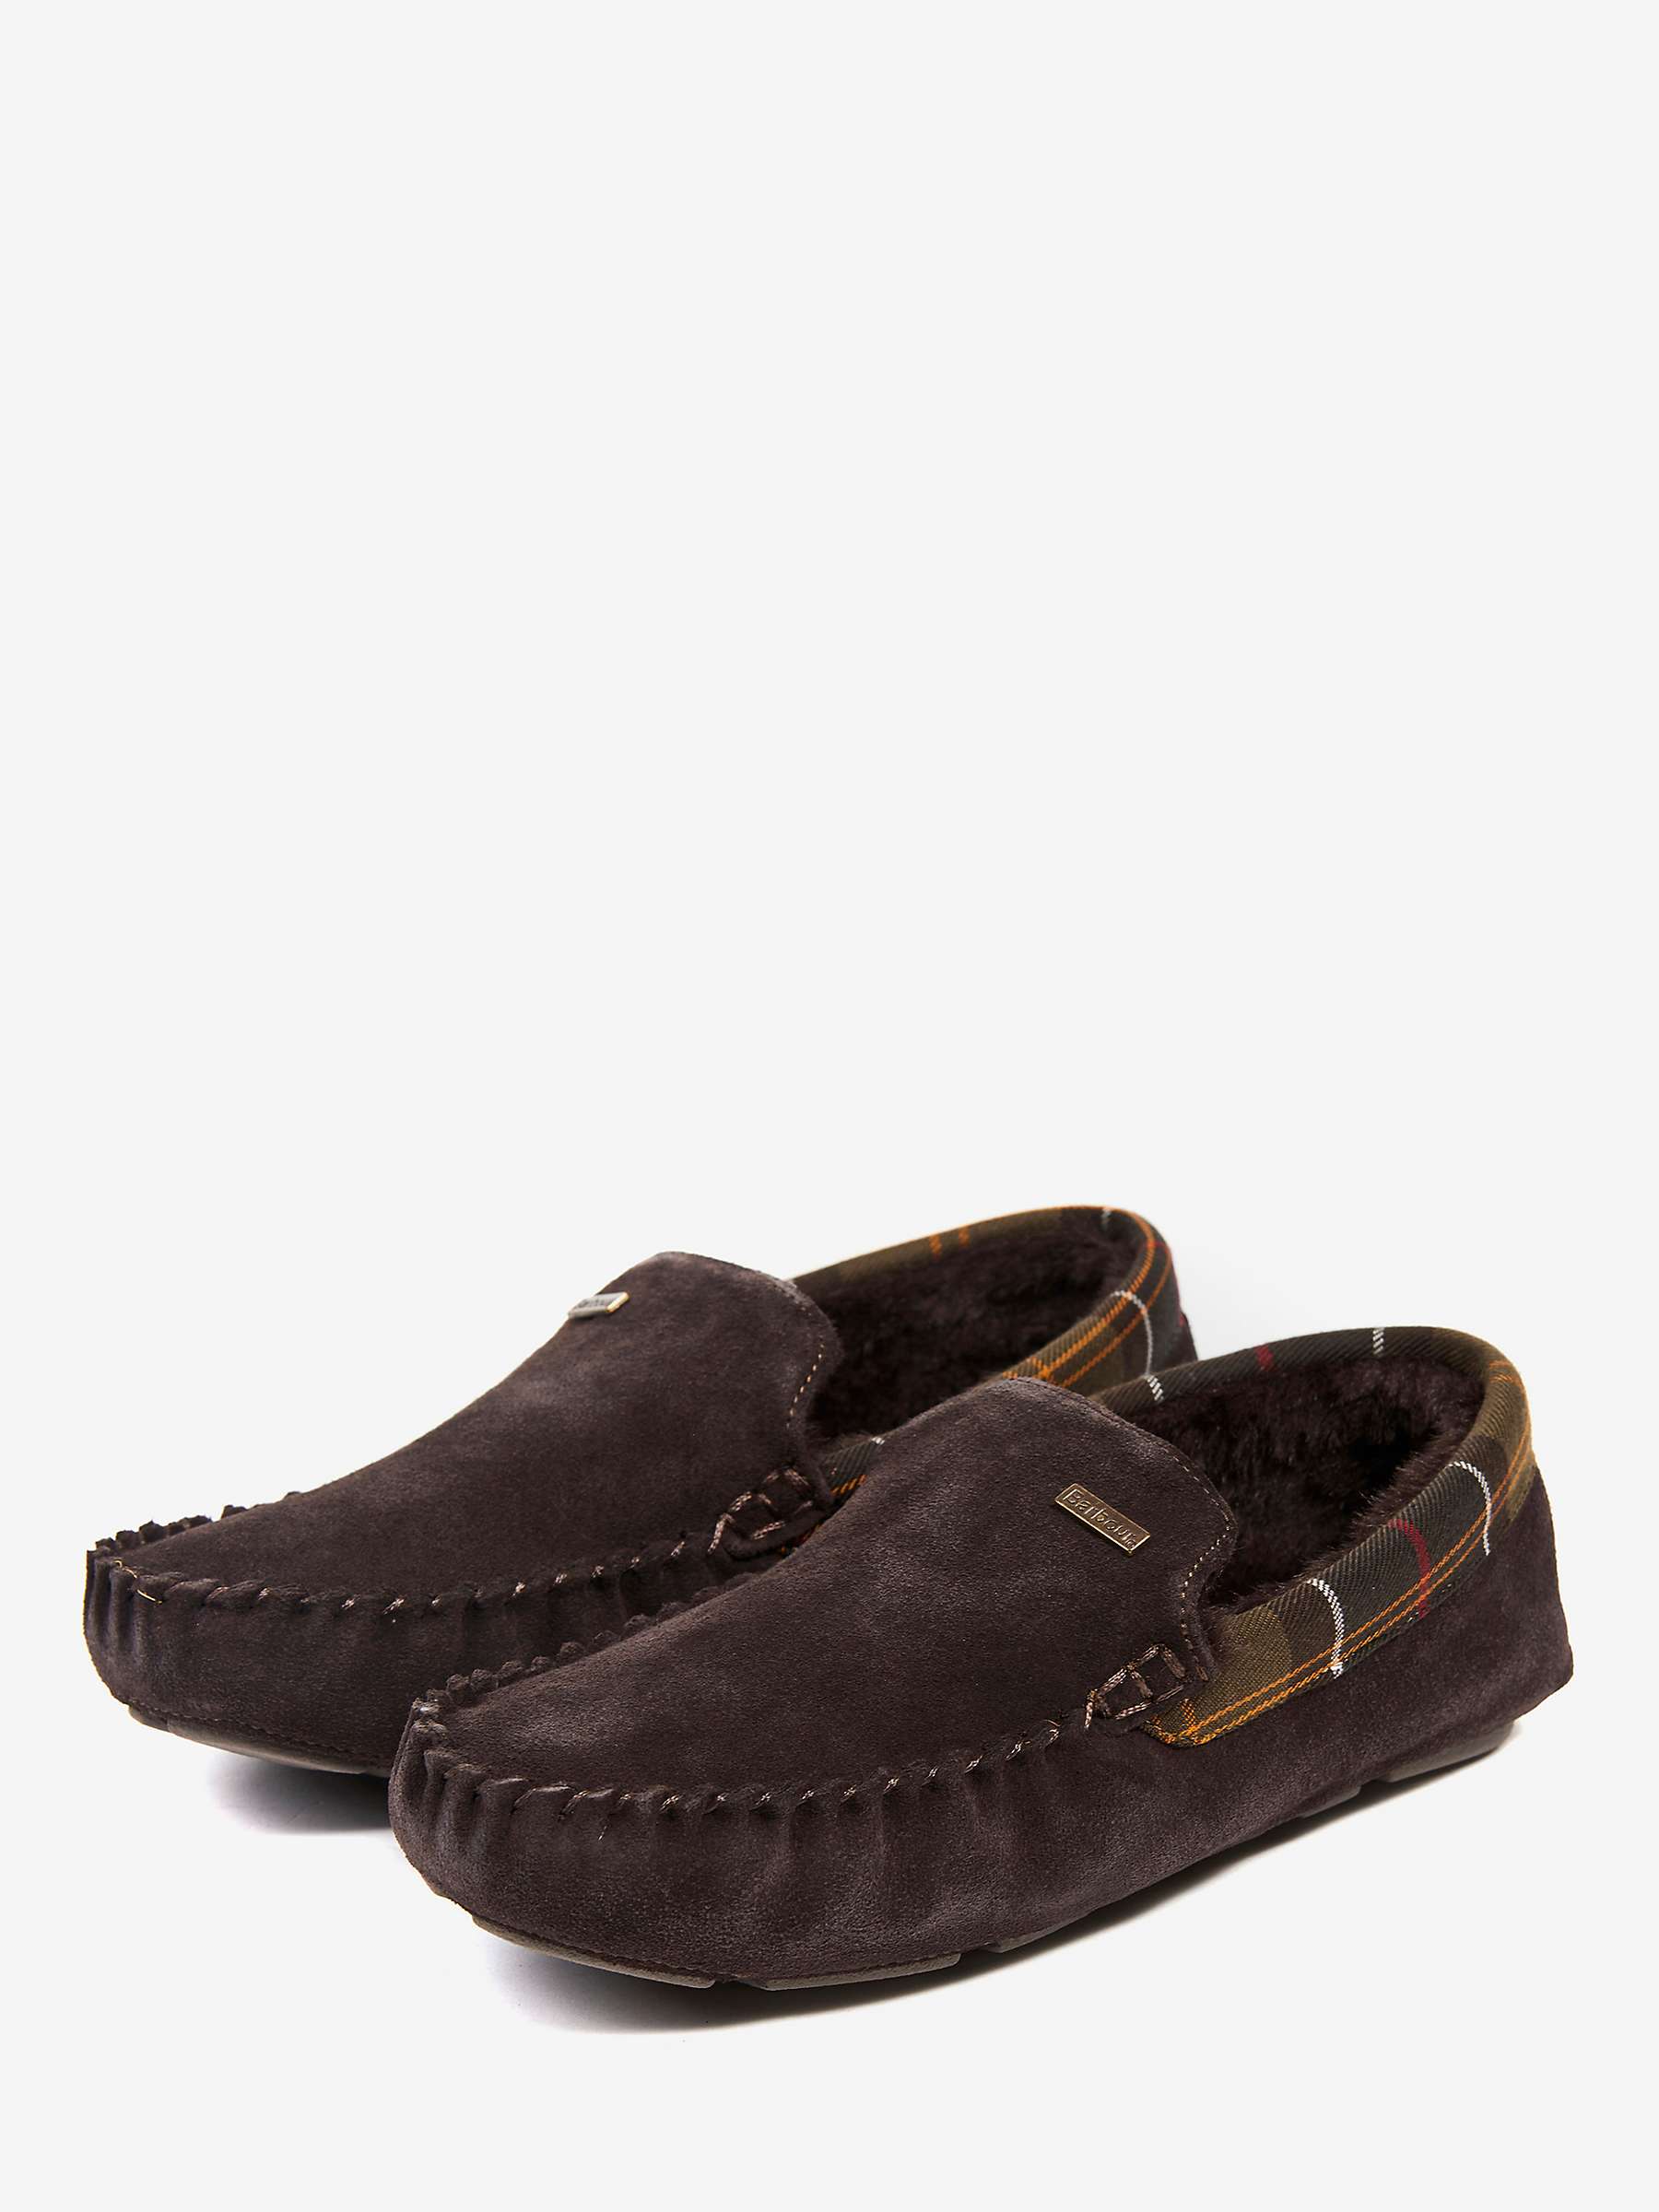 Buy Barbour Monty Suede Slippers Online at johnlewis.com